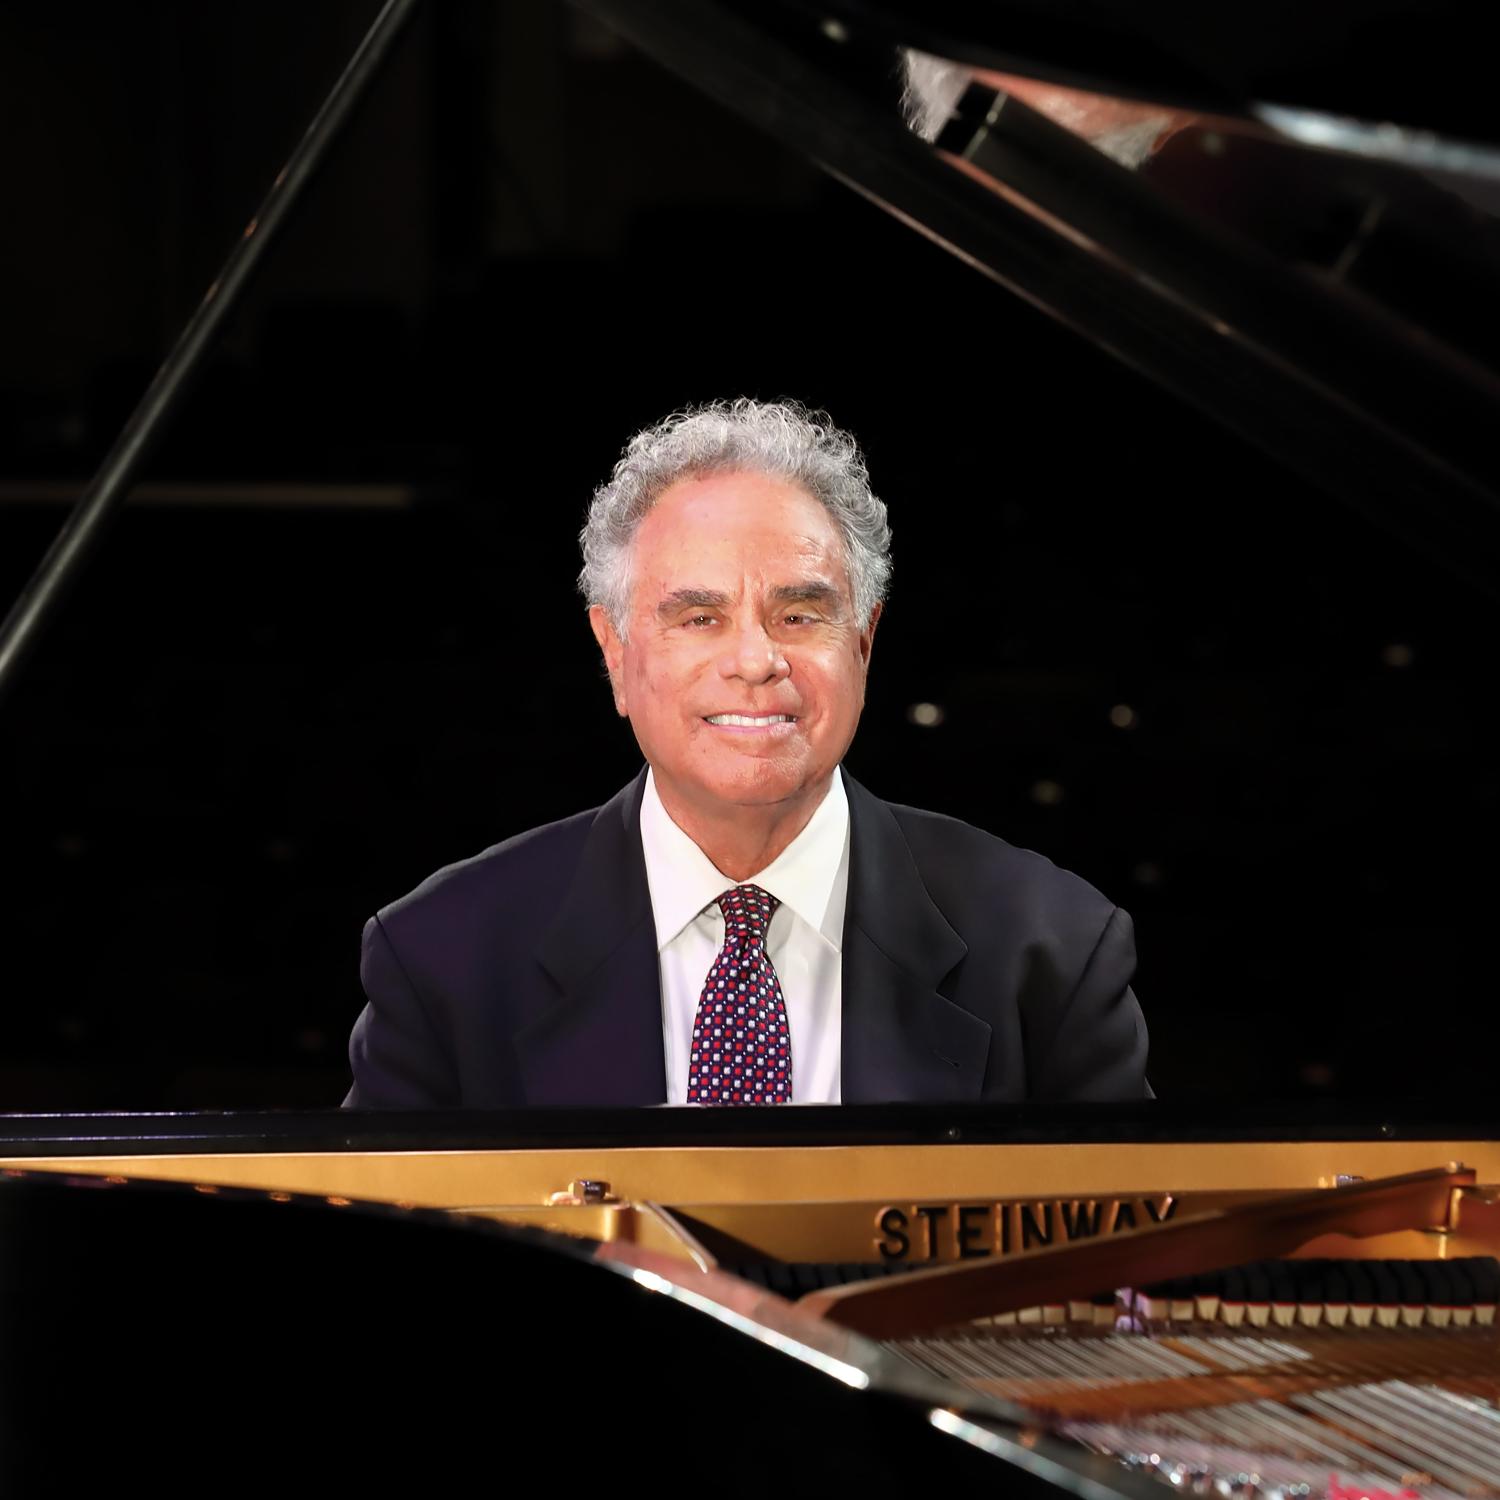 Jeffrey Siegel at the piano